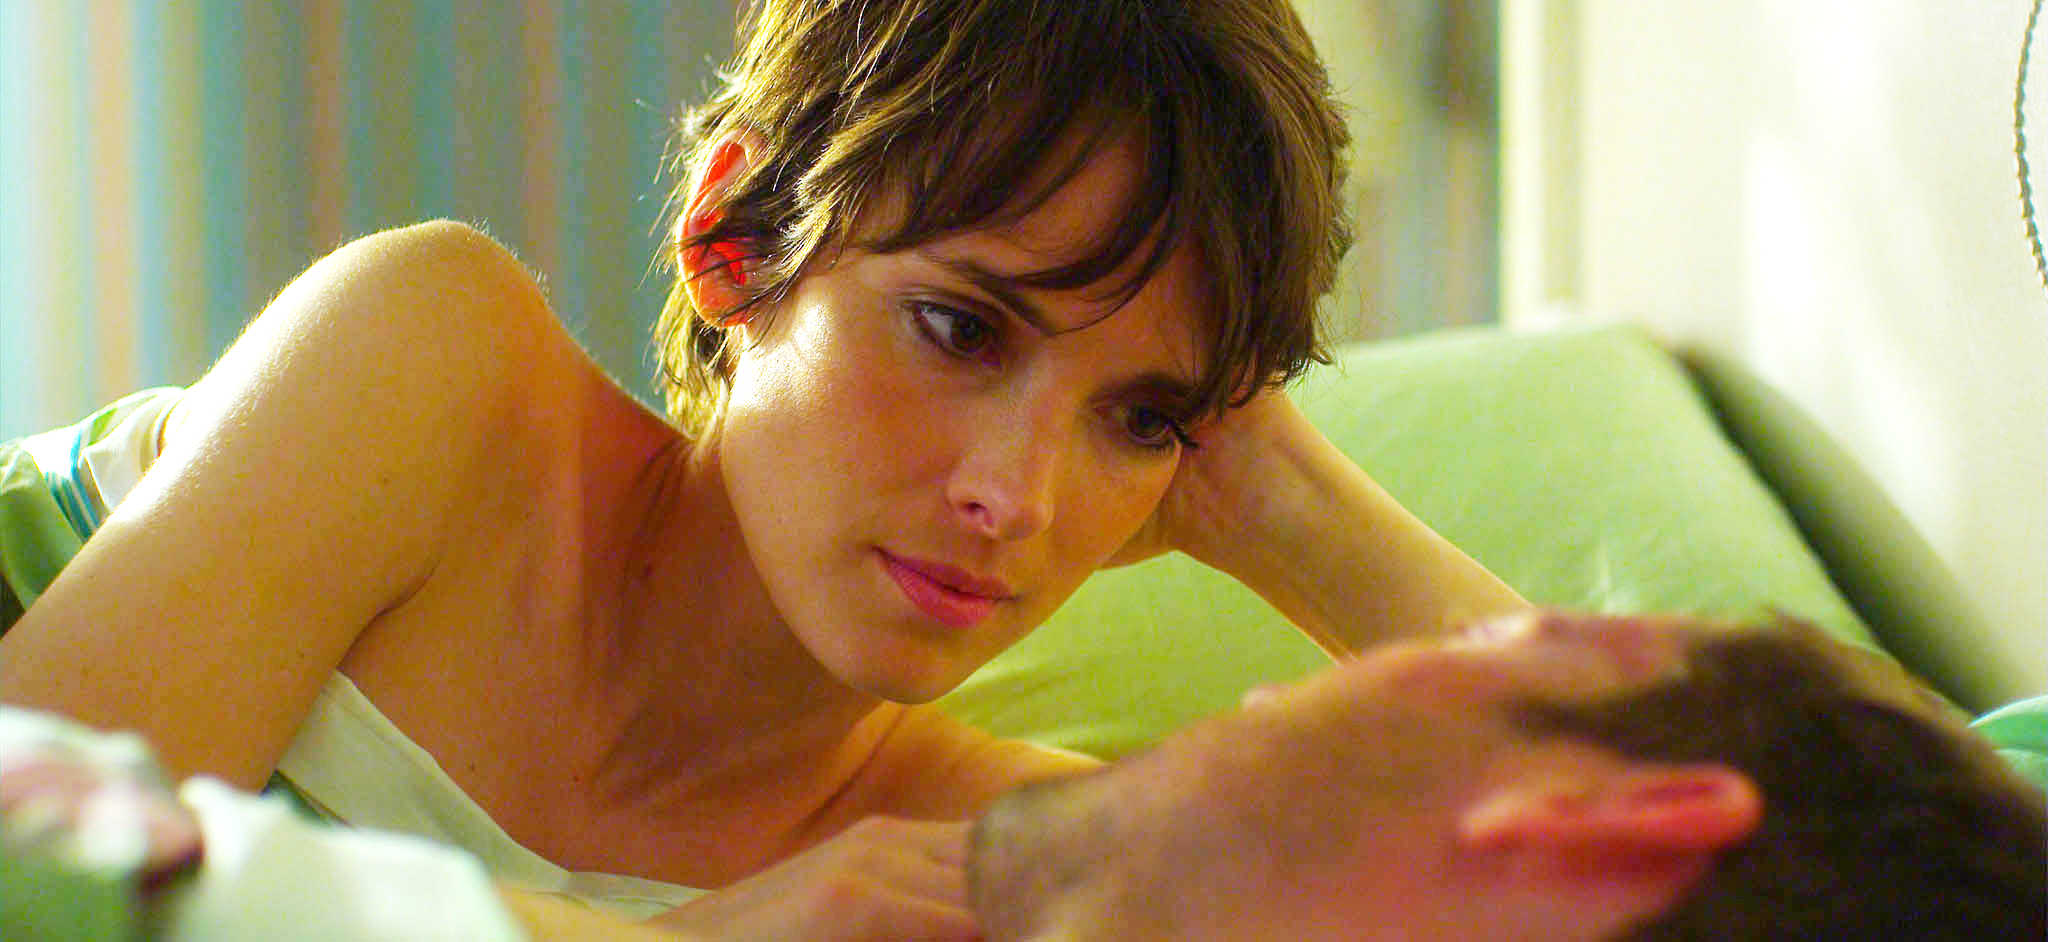 Winona Ryder stars as Scarlet Smith in Initiate Productions' Stay Cool (2011)